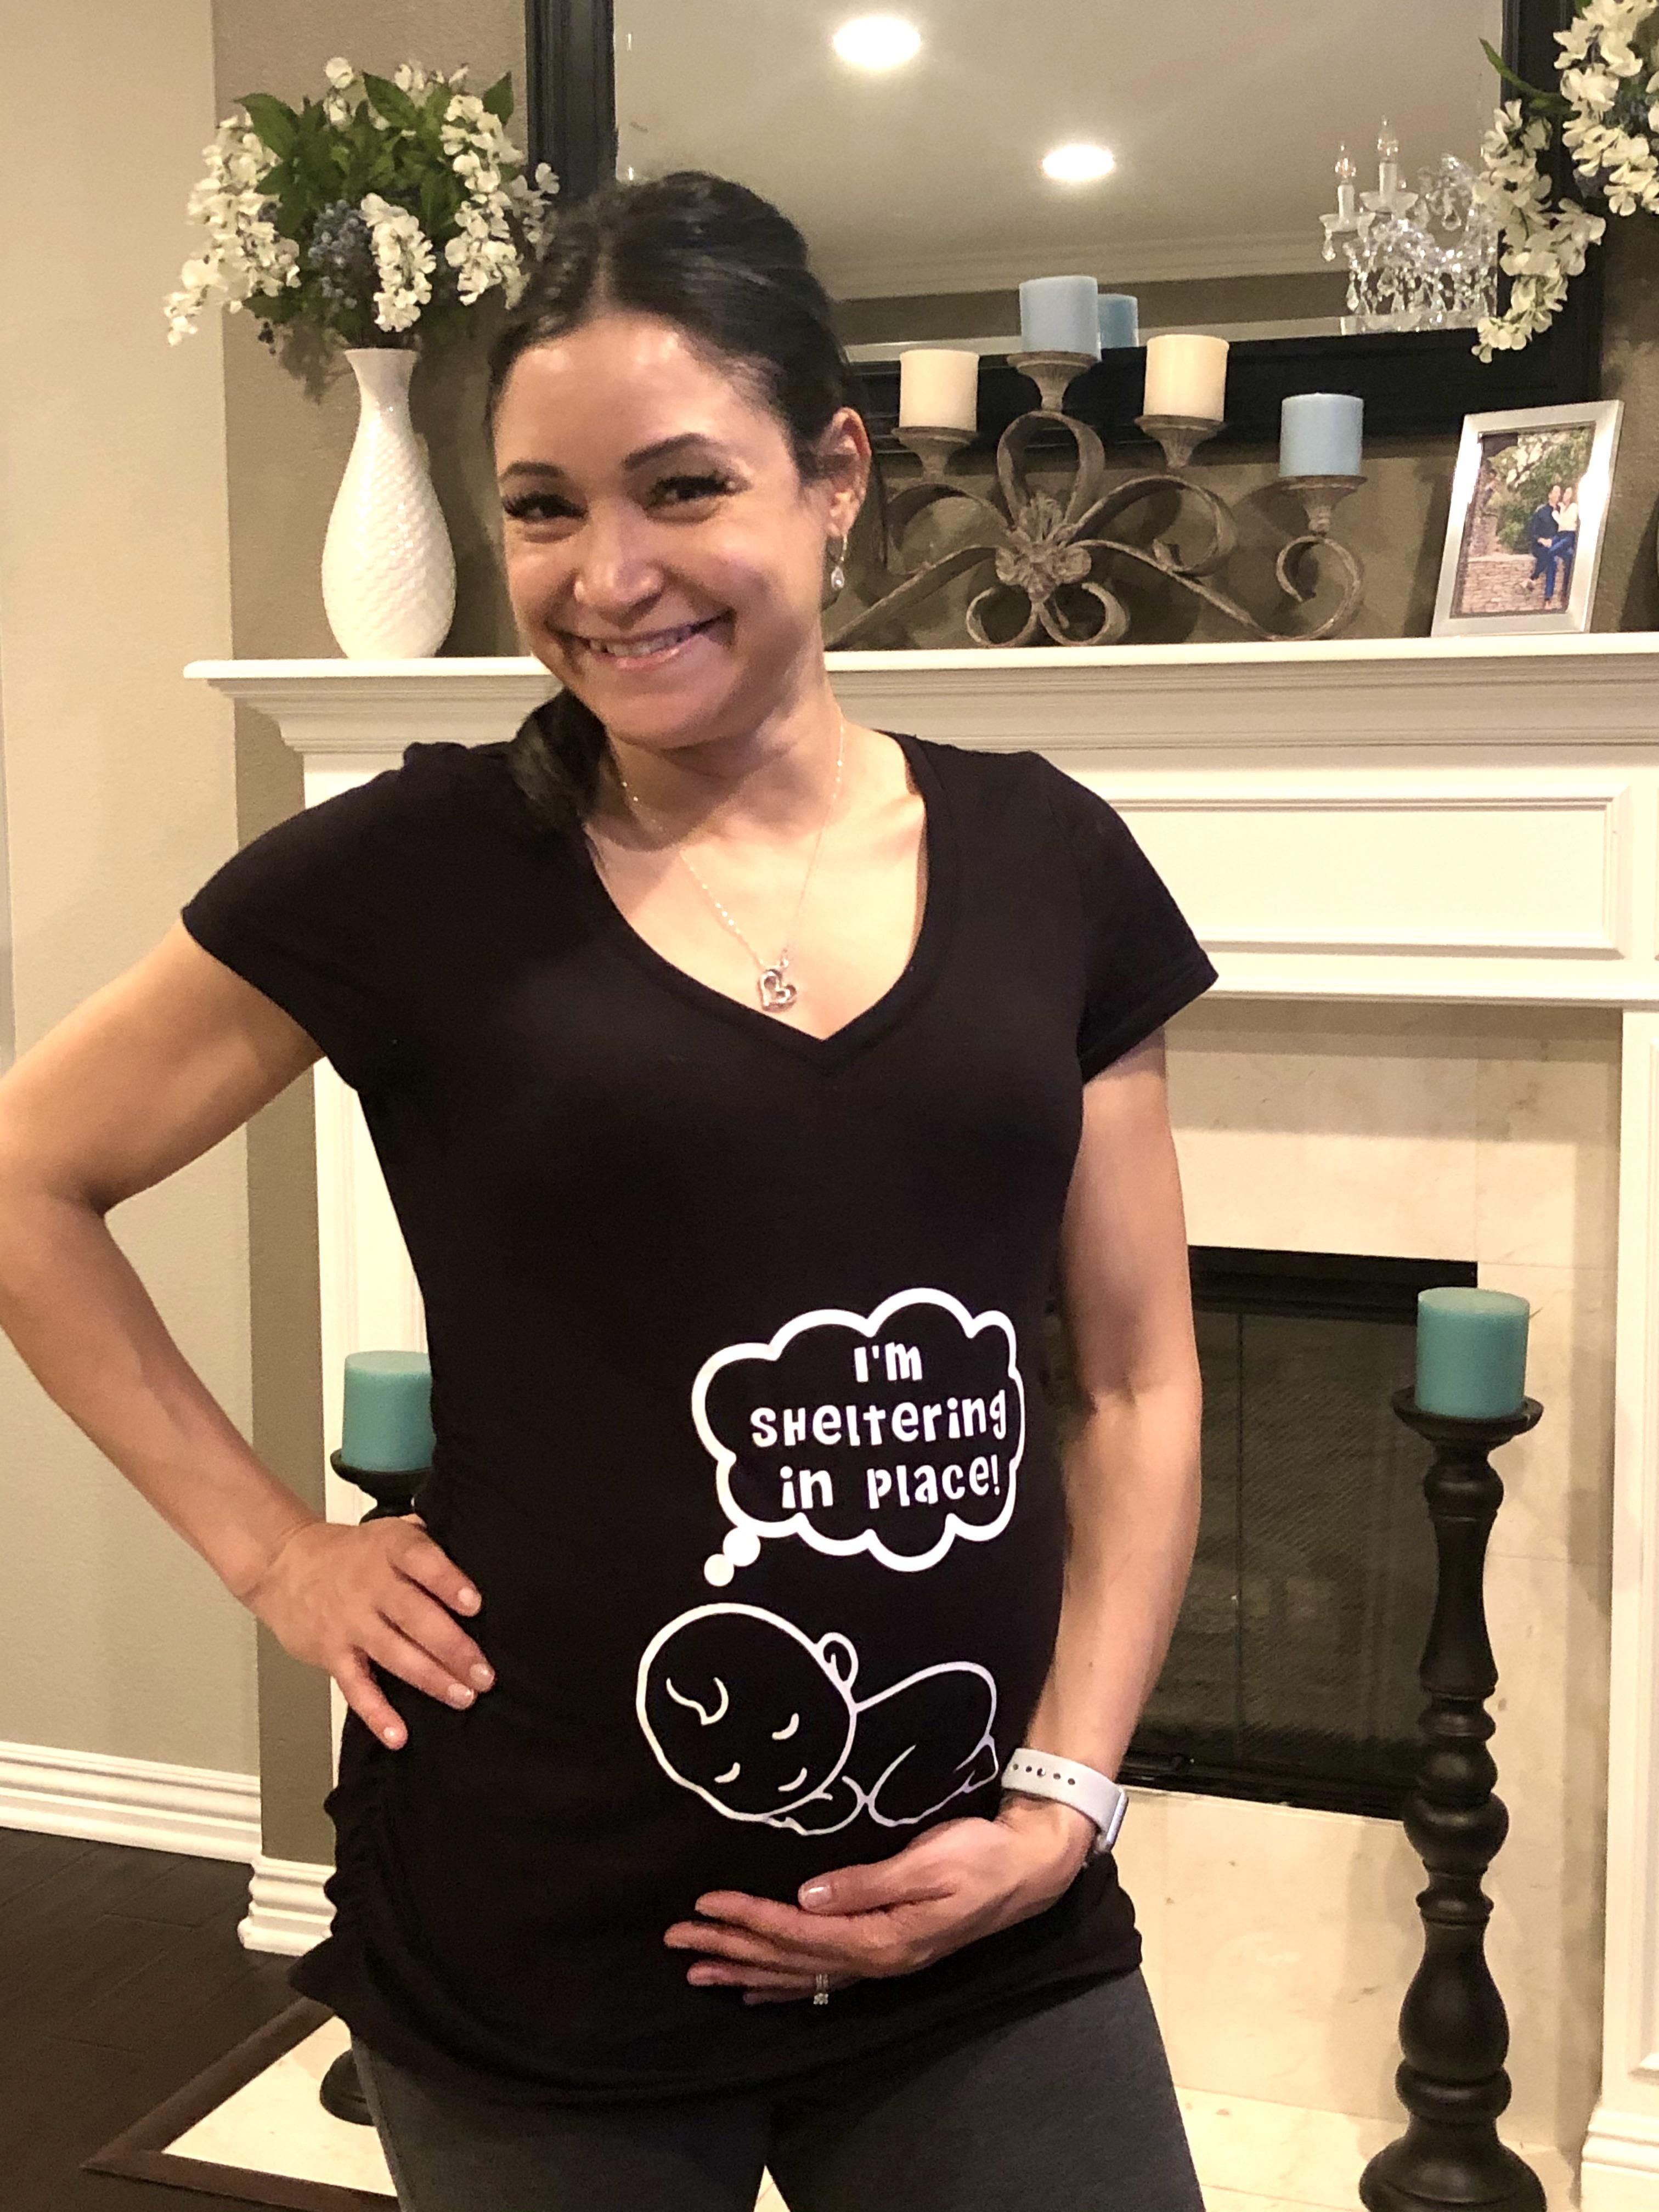 My mom made my wife a times-relevant maternity shirt for her first Mother’s Day